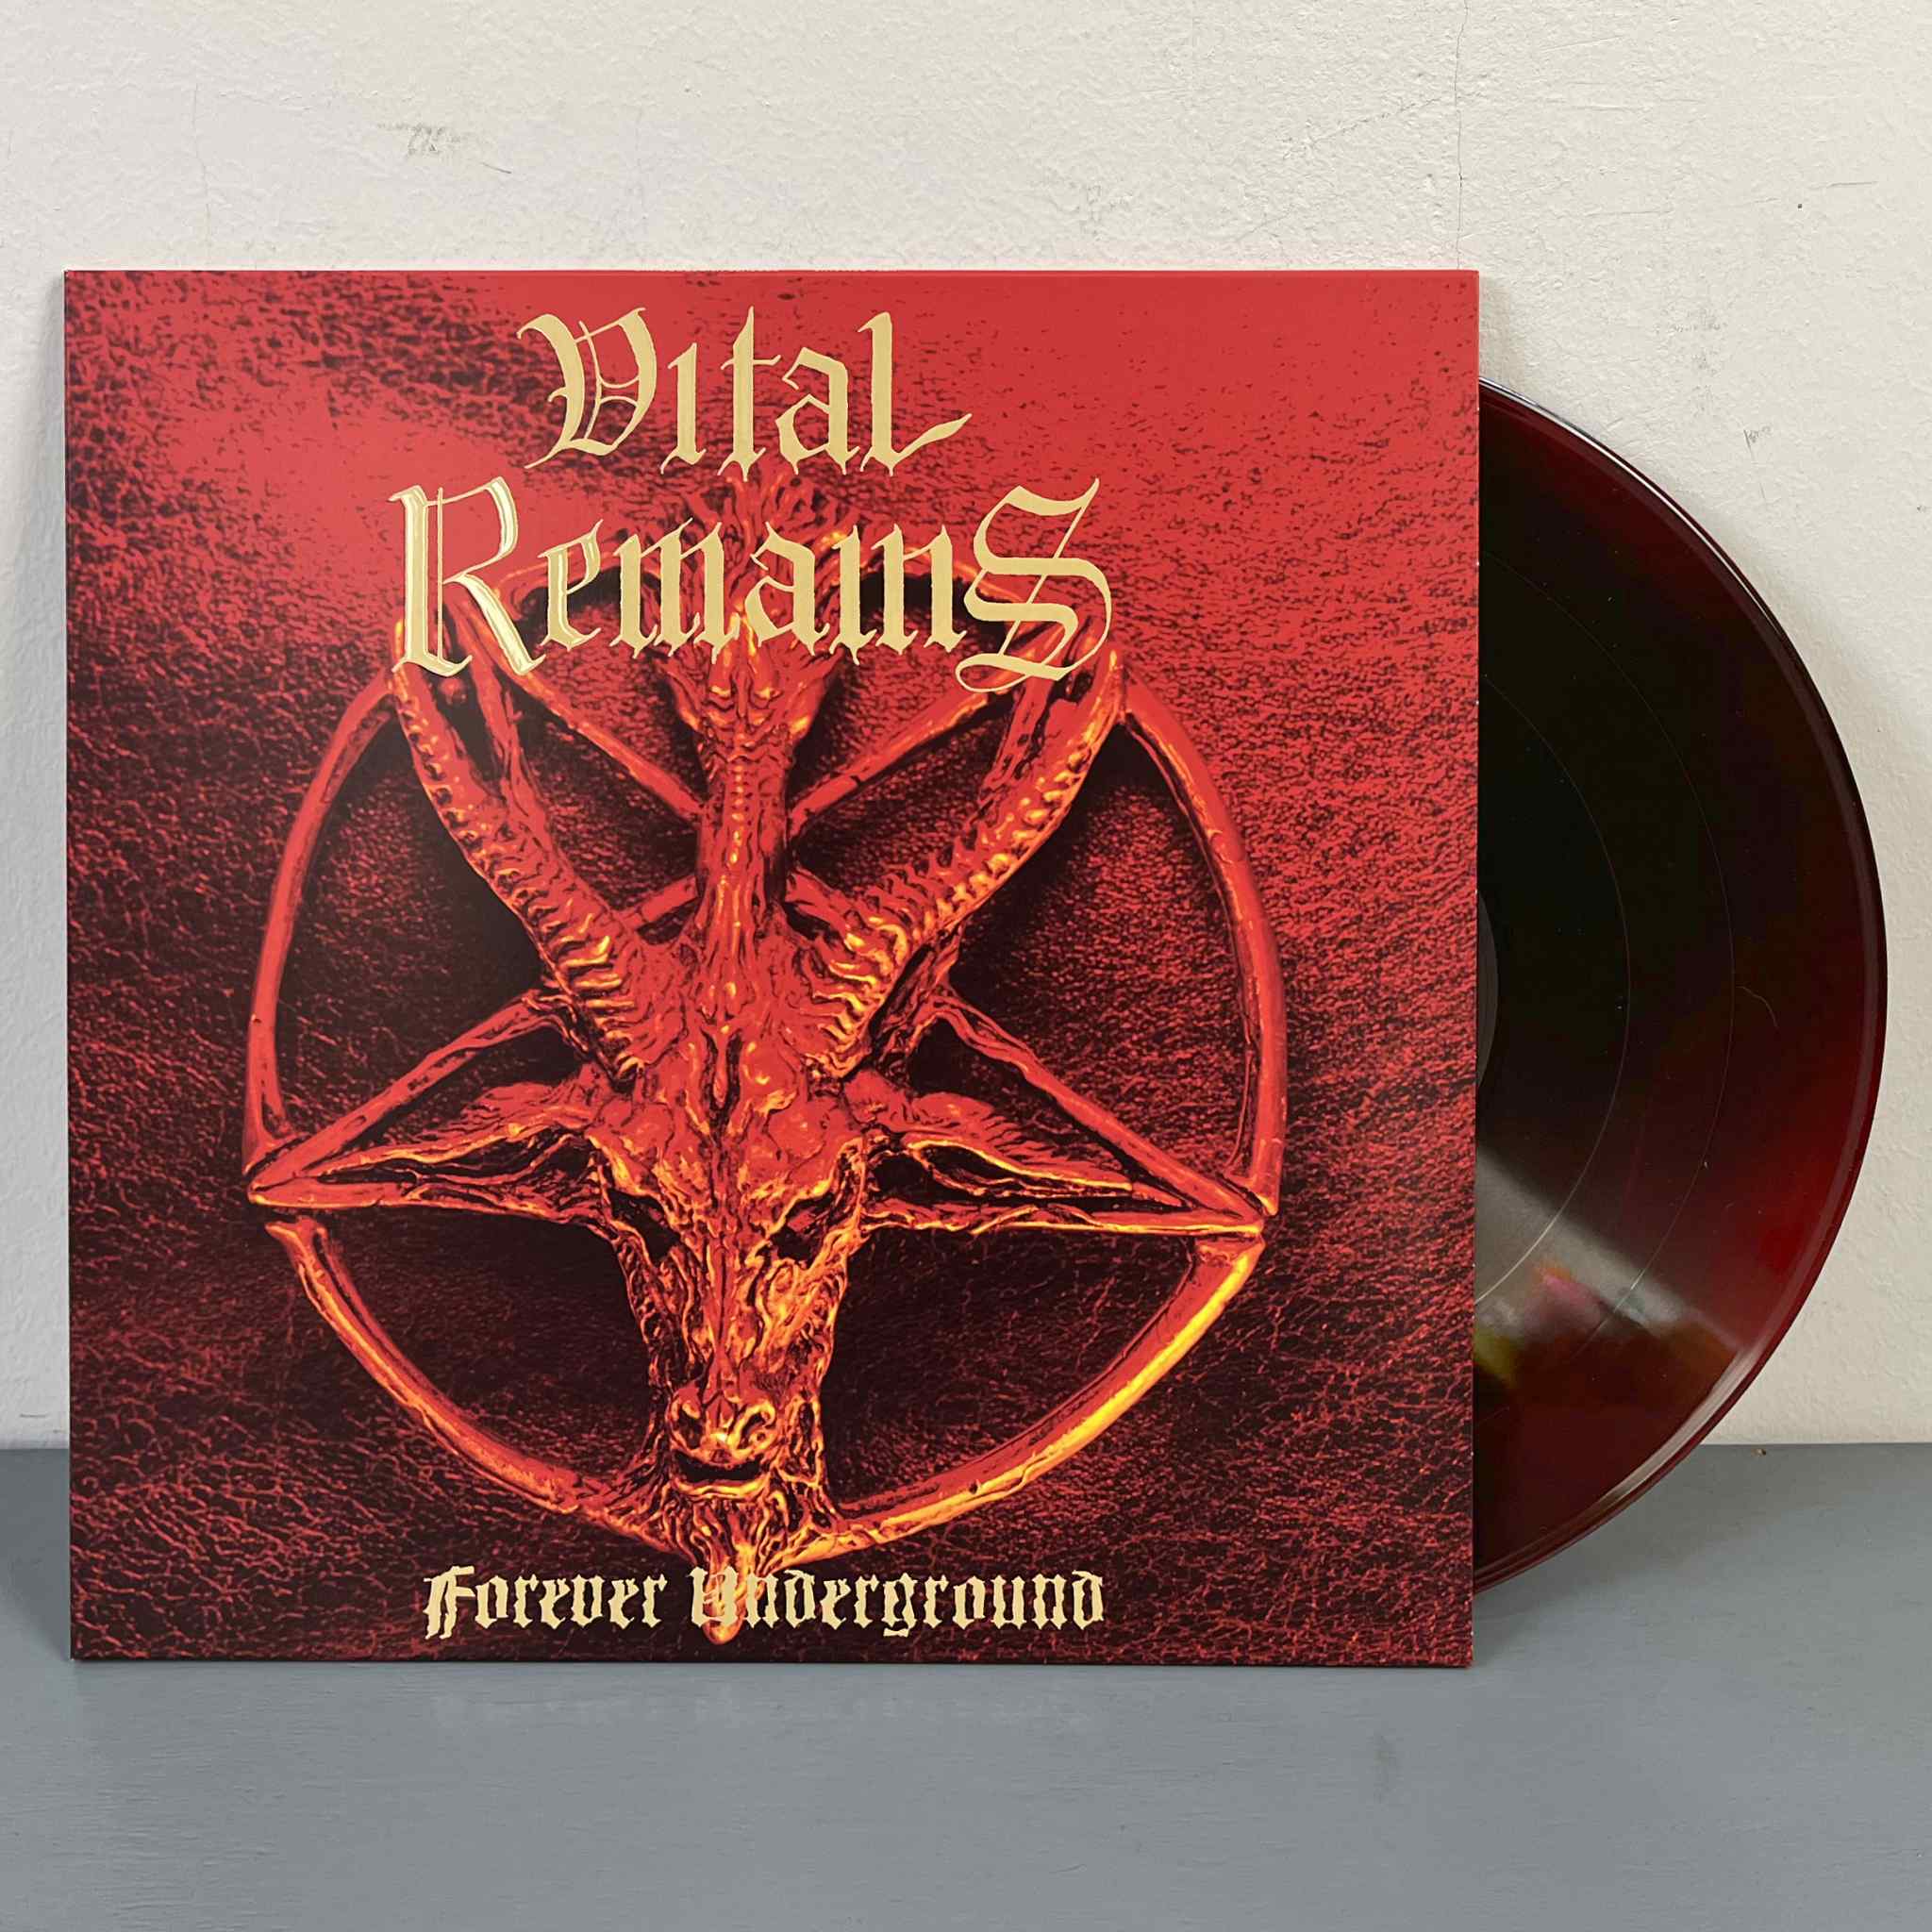 Vital Remains - Forever Underground LP (Red With Black Galaxy Vinyl ...